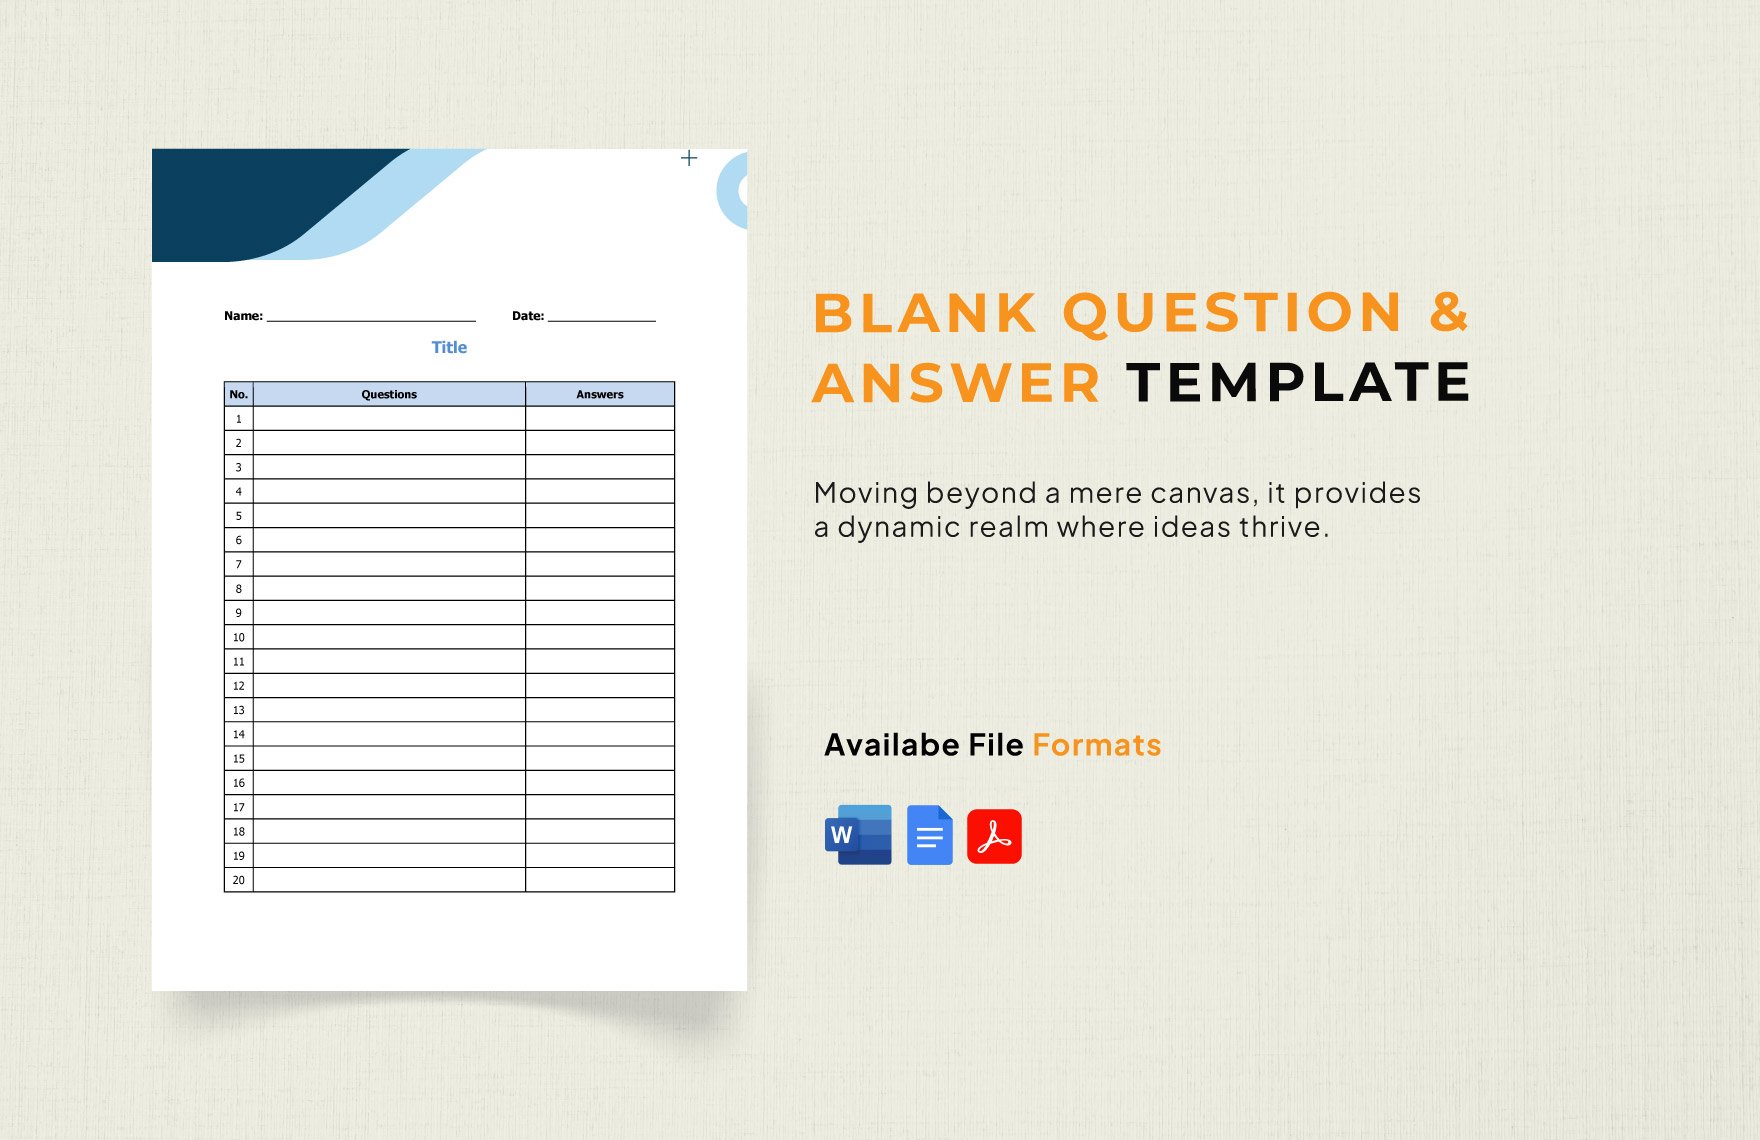 Blank Question & Answer Template